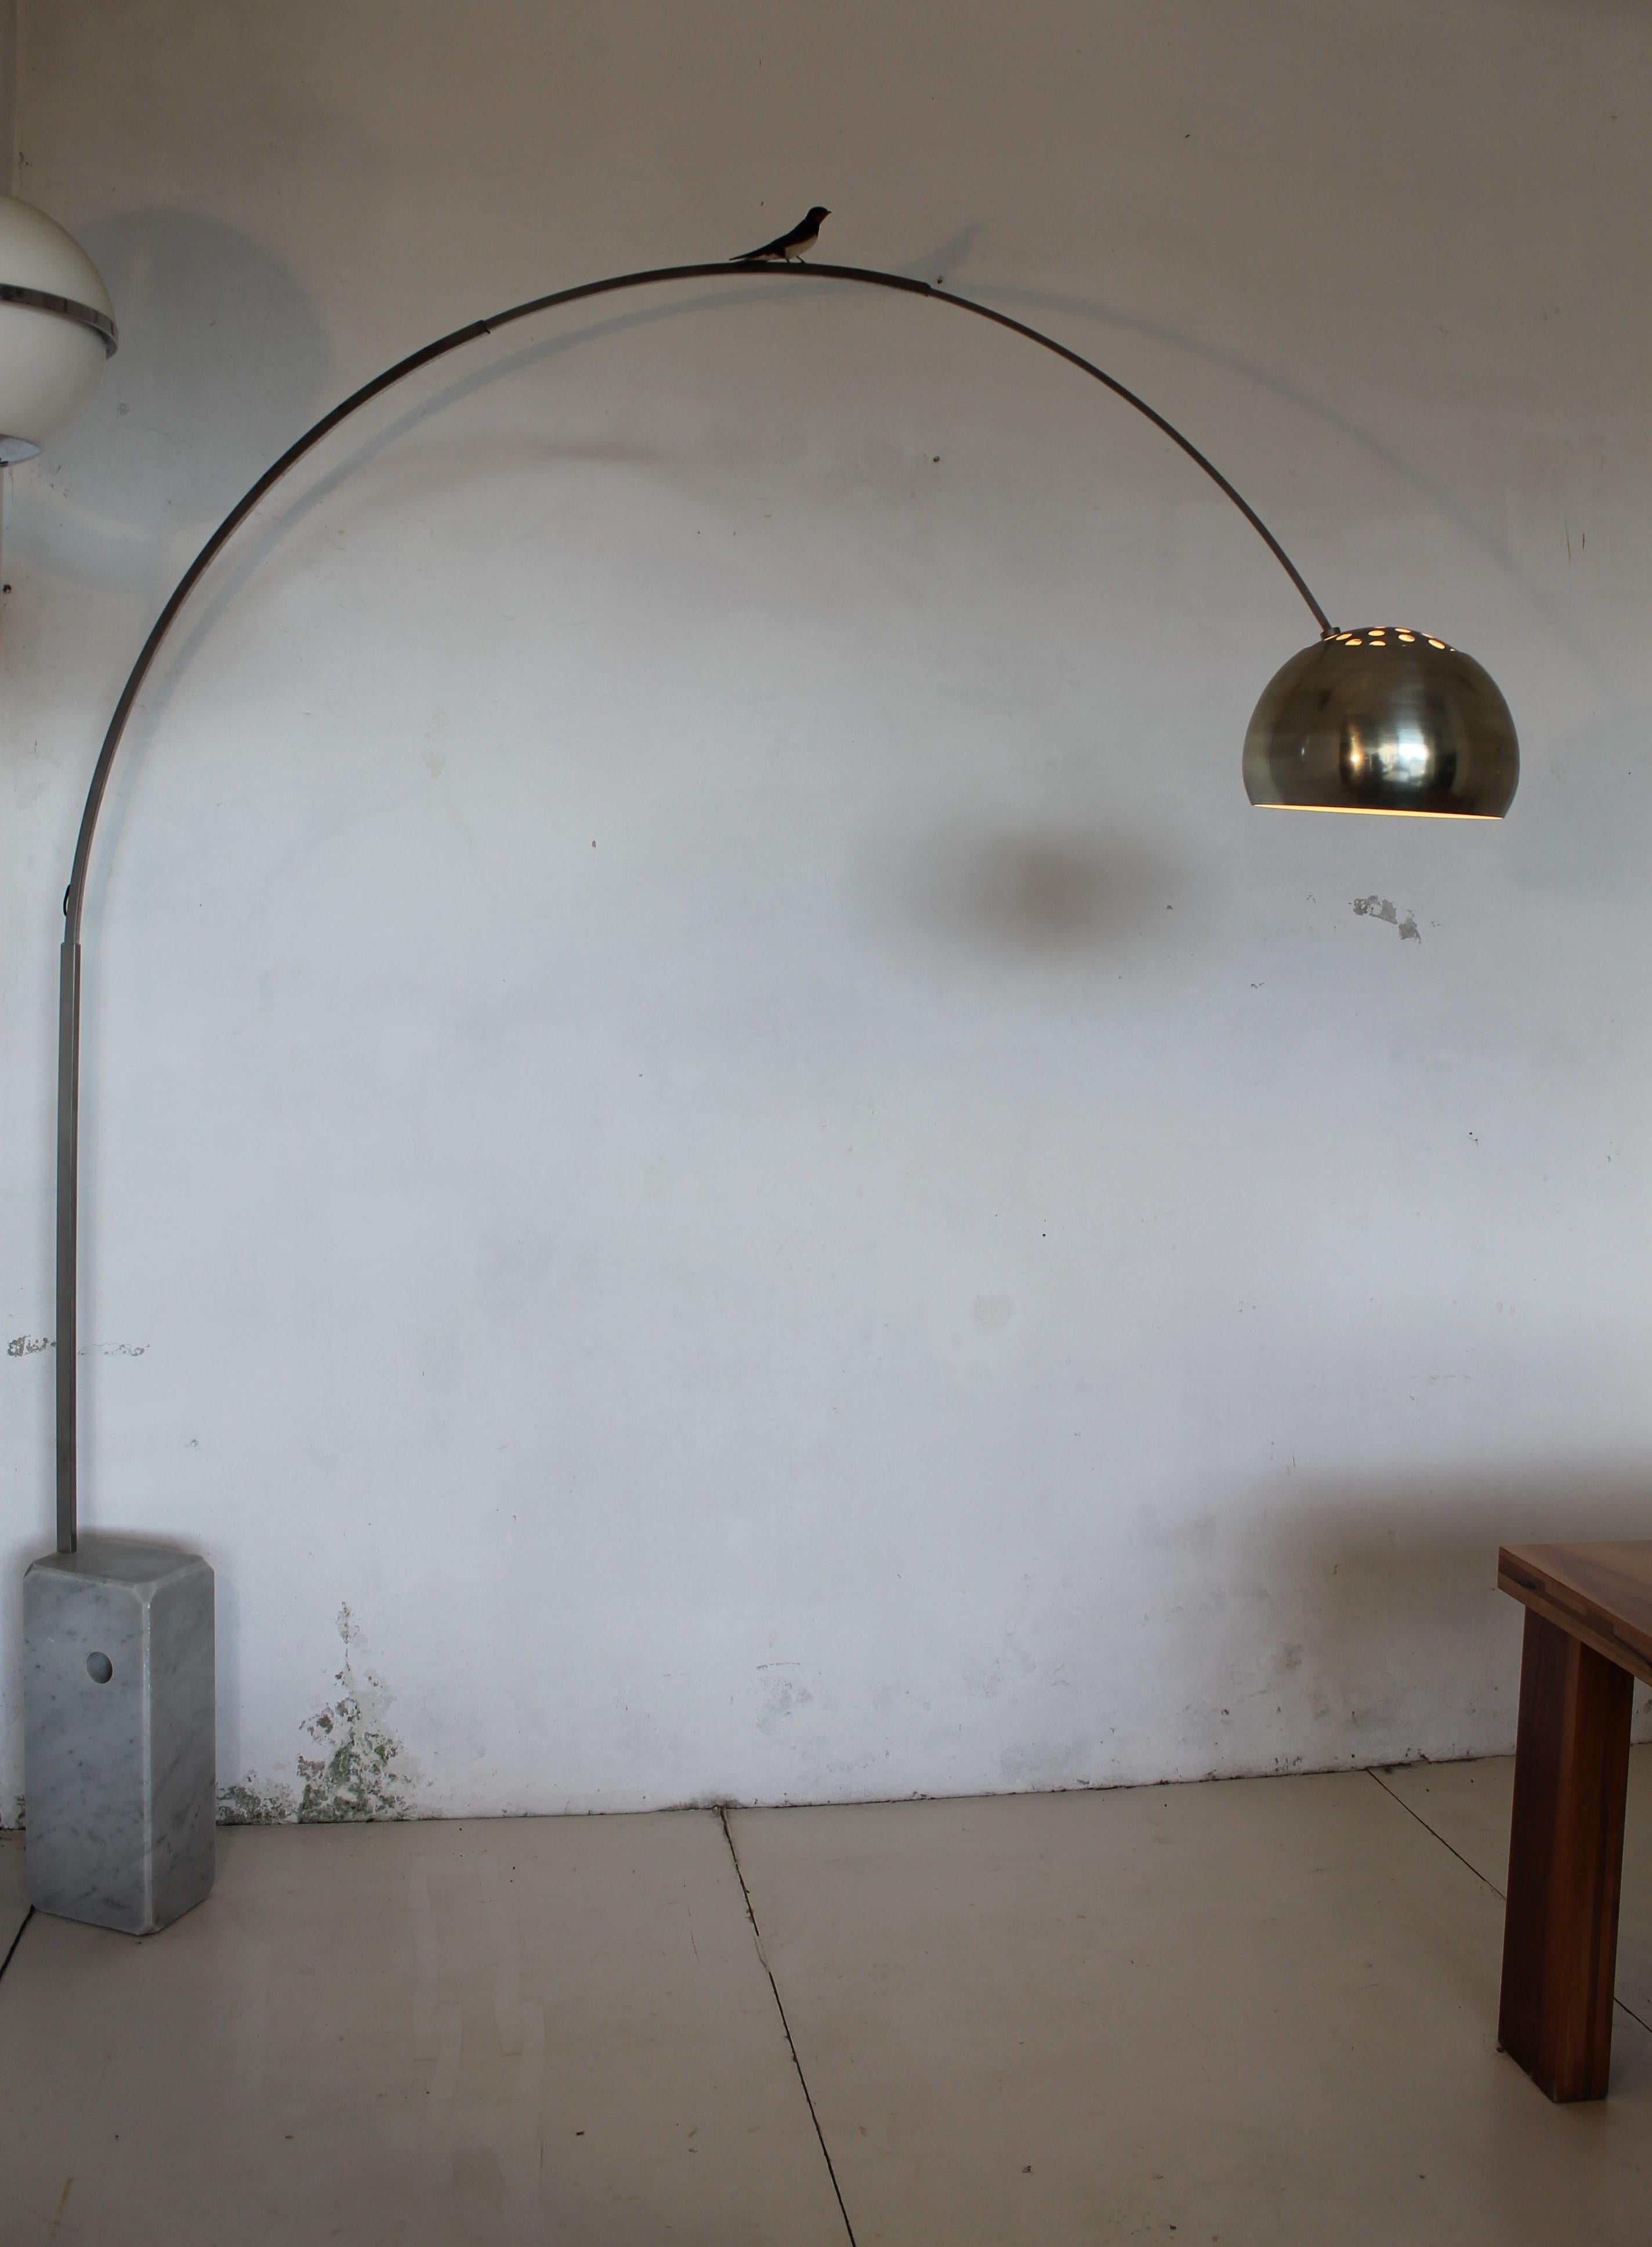 Aluminum Arco Flos Lamp by Achille and Pier Giacomo Castiglioni, Italy '70s For Sale